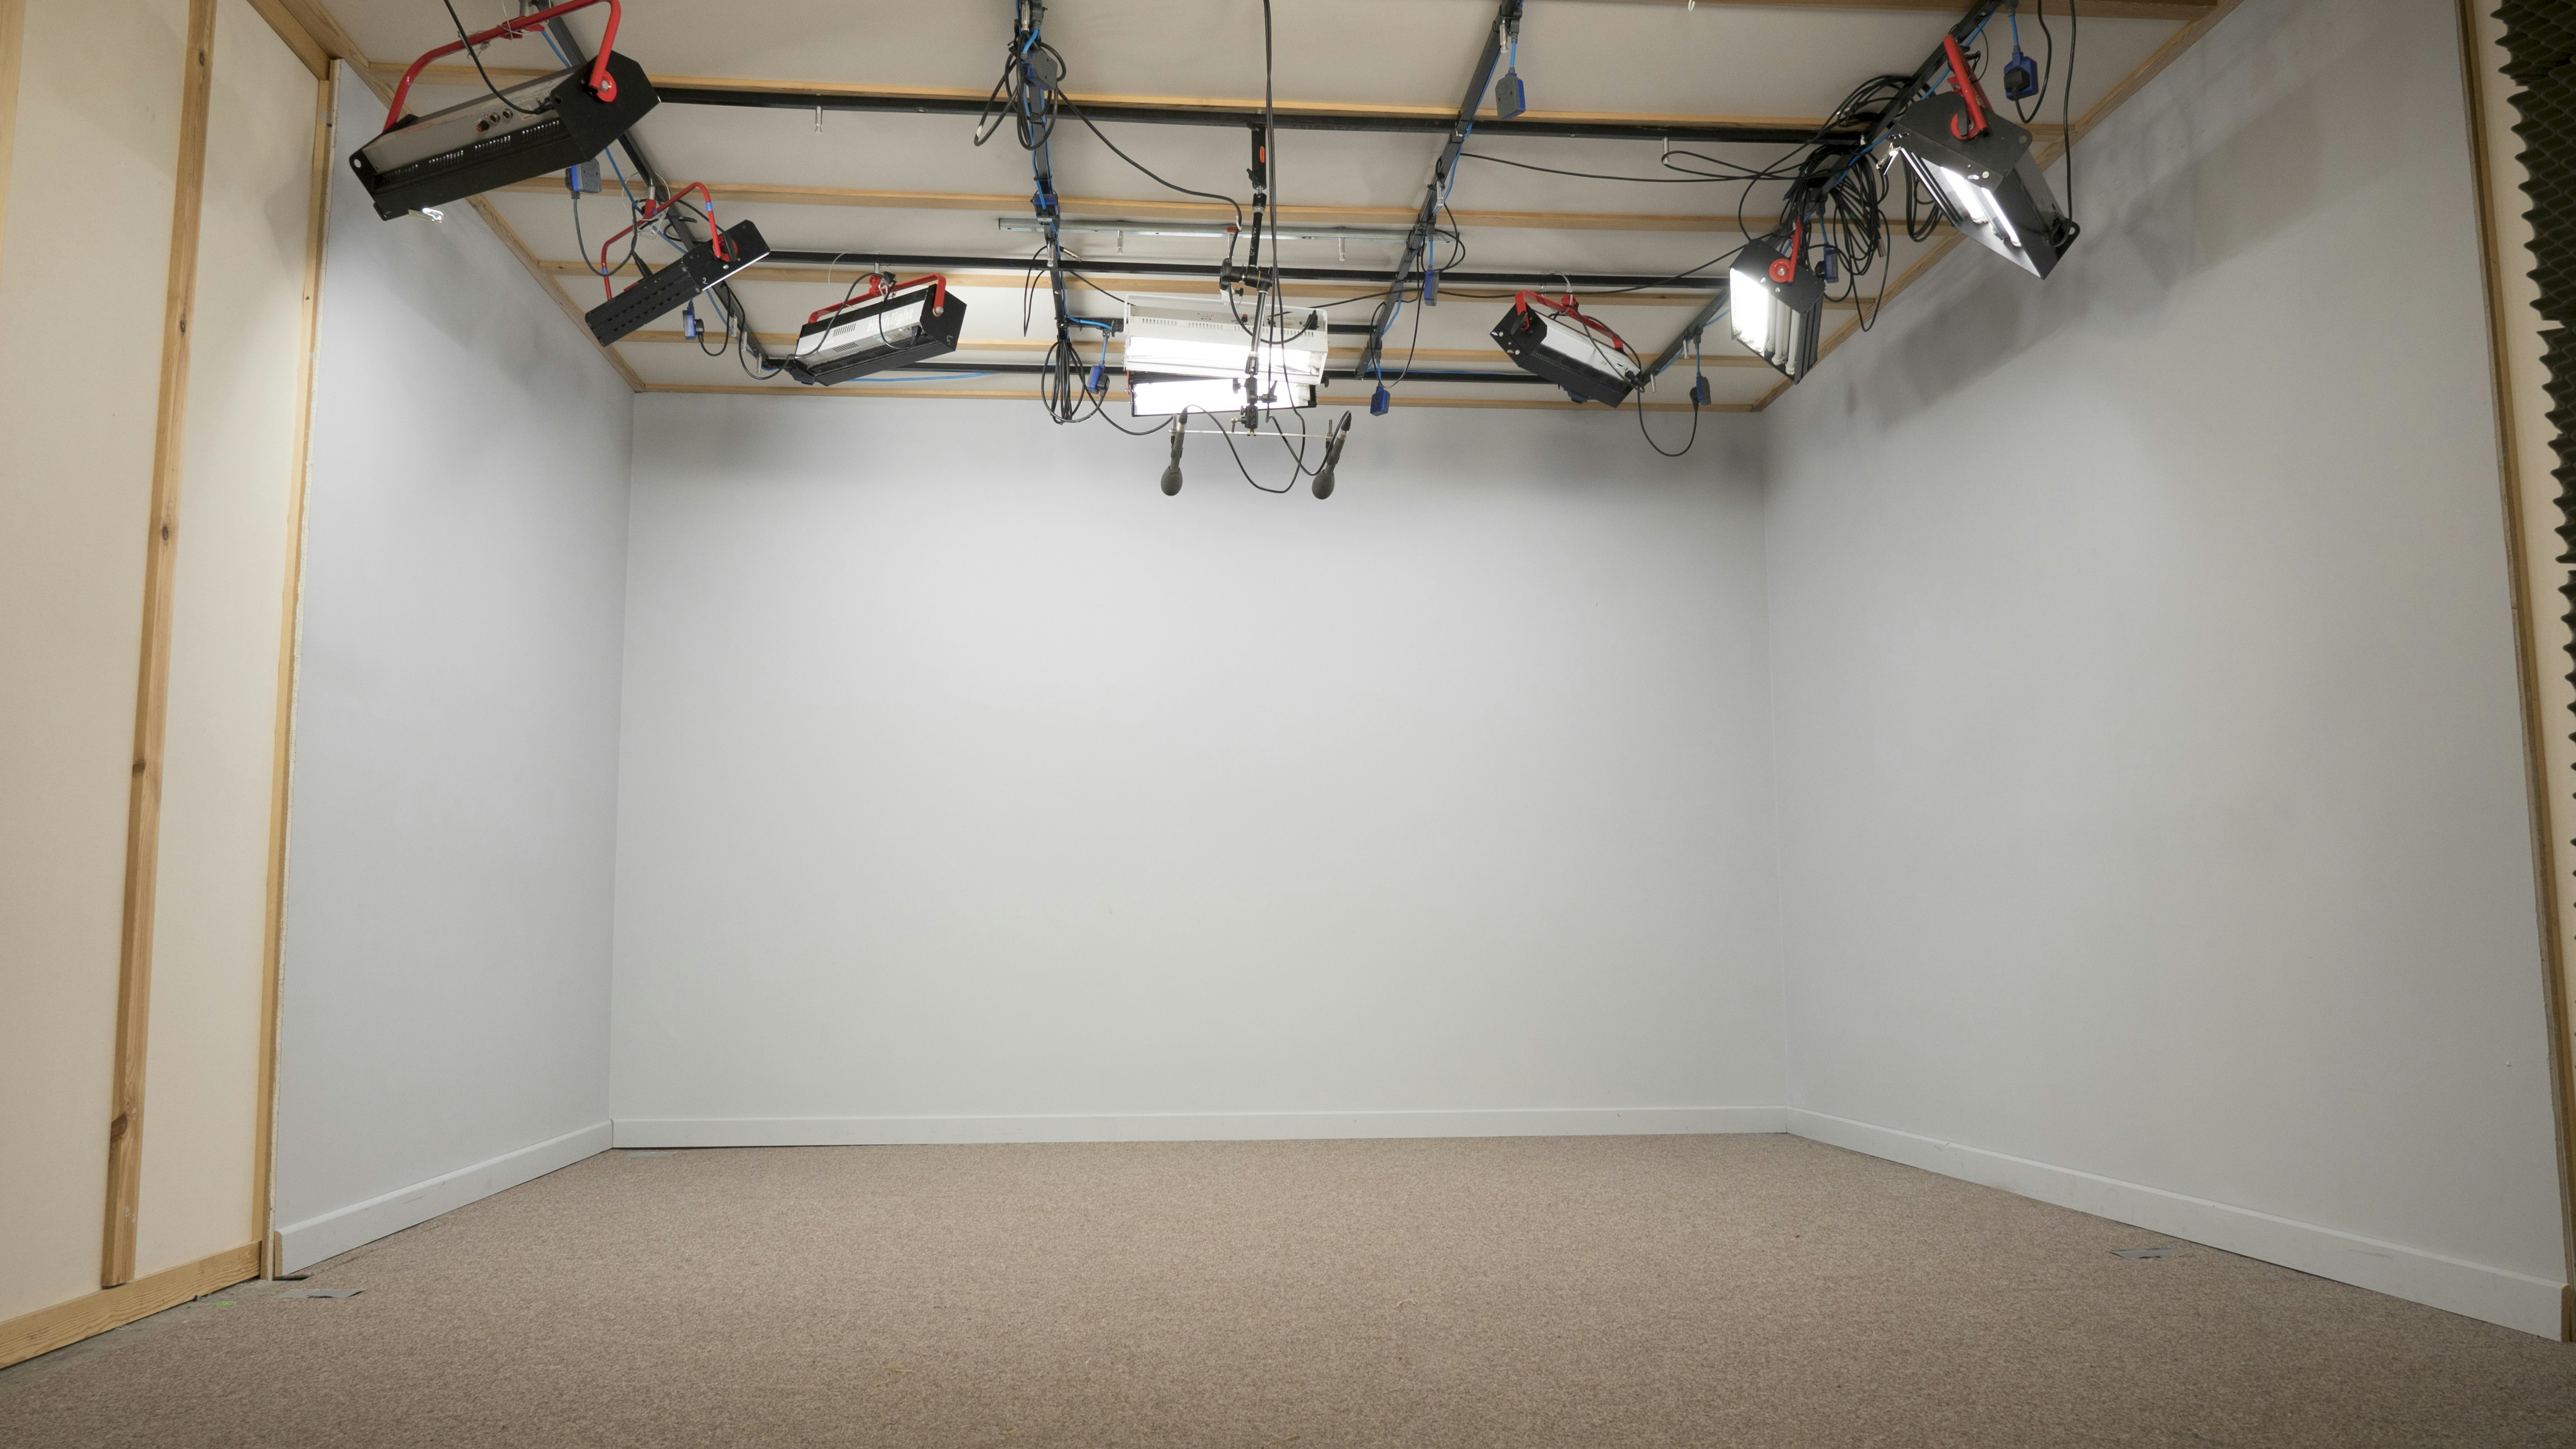 Filming Locations Venues in Manchester - Galleon Studios